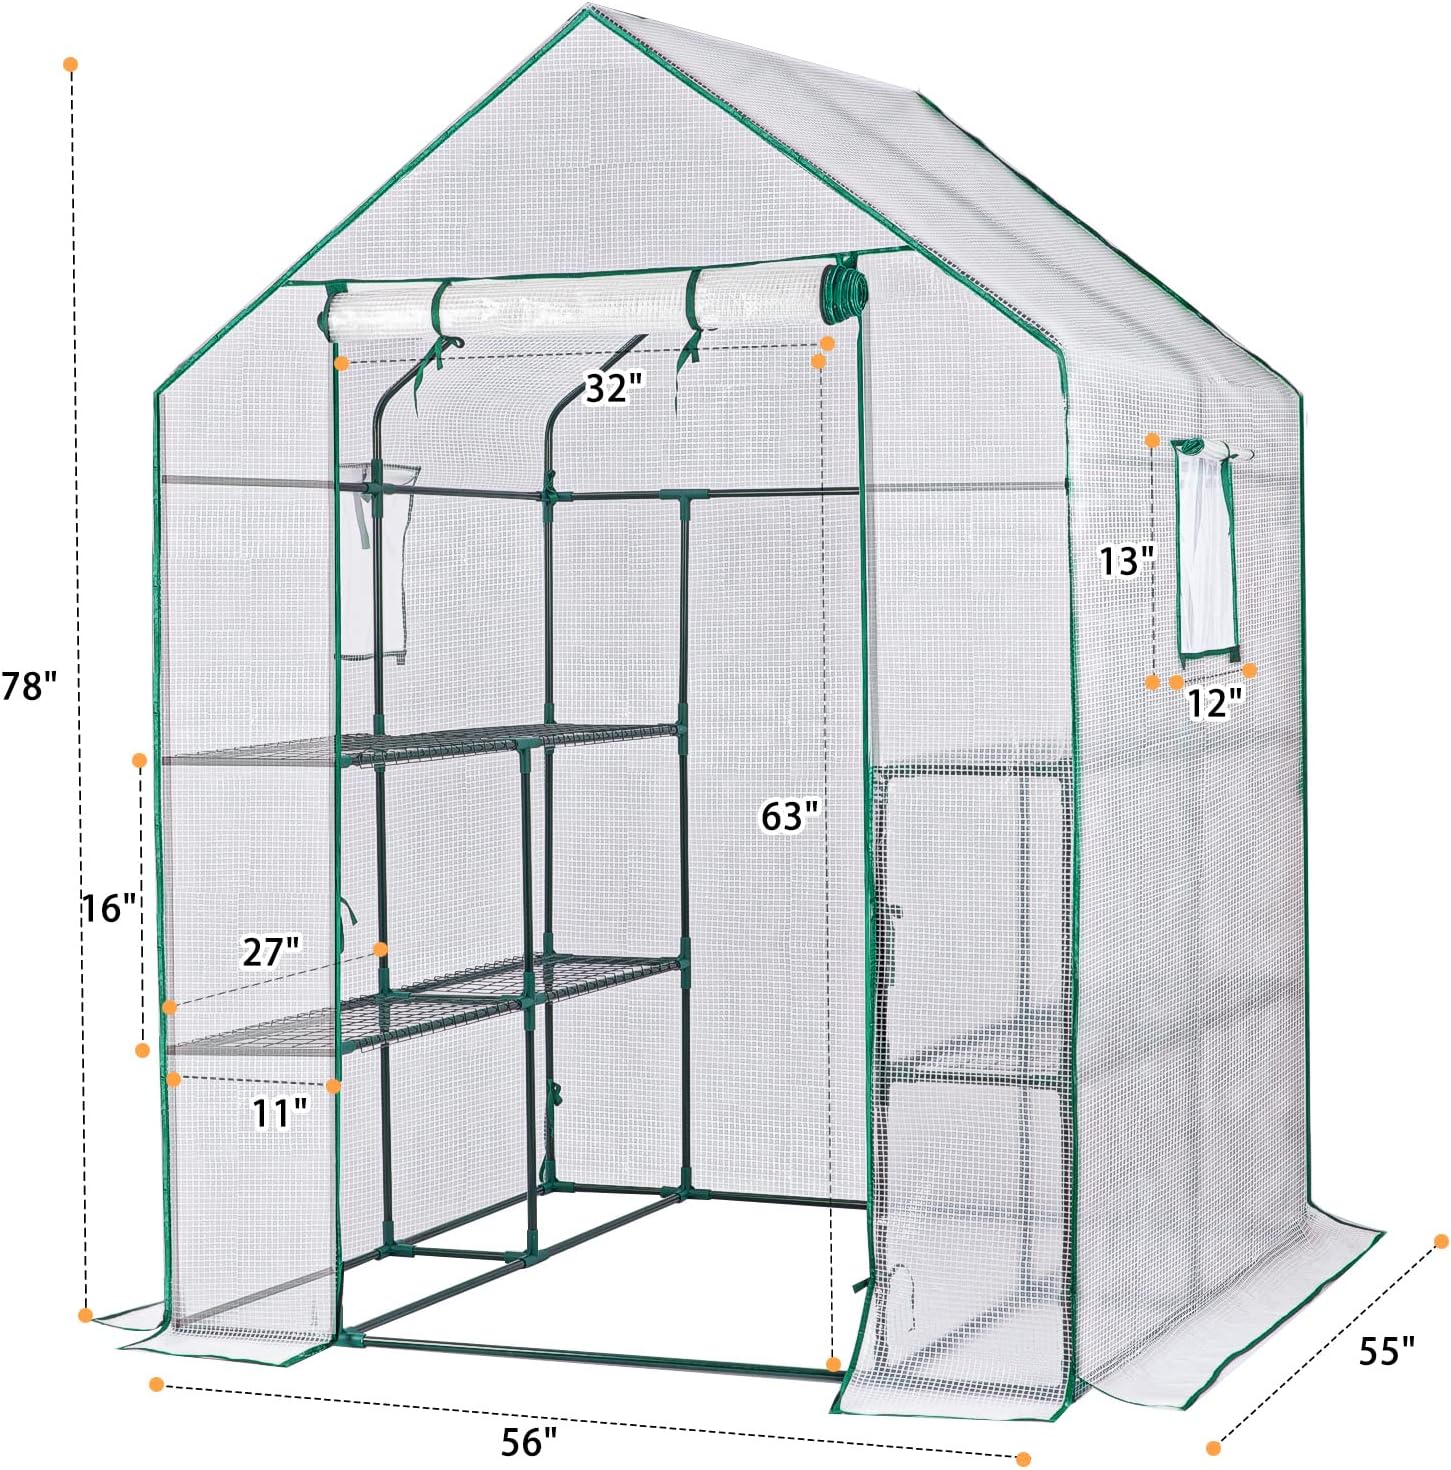 Greenhouses for Outdoors, Portable Walk in Greenhouse for Garden Plants That Need Frost Protection and Away from Pests and Animals